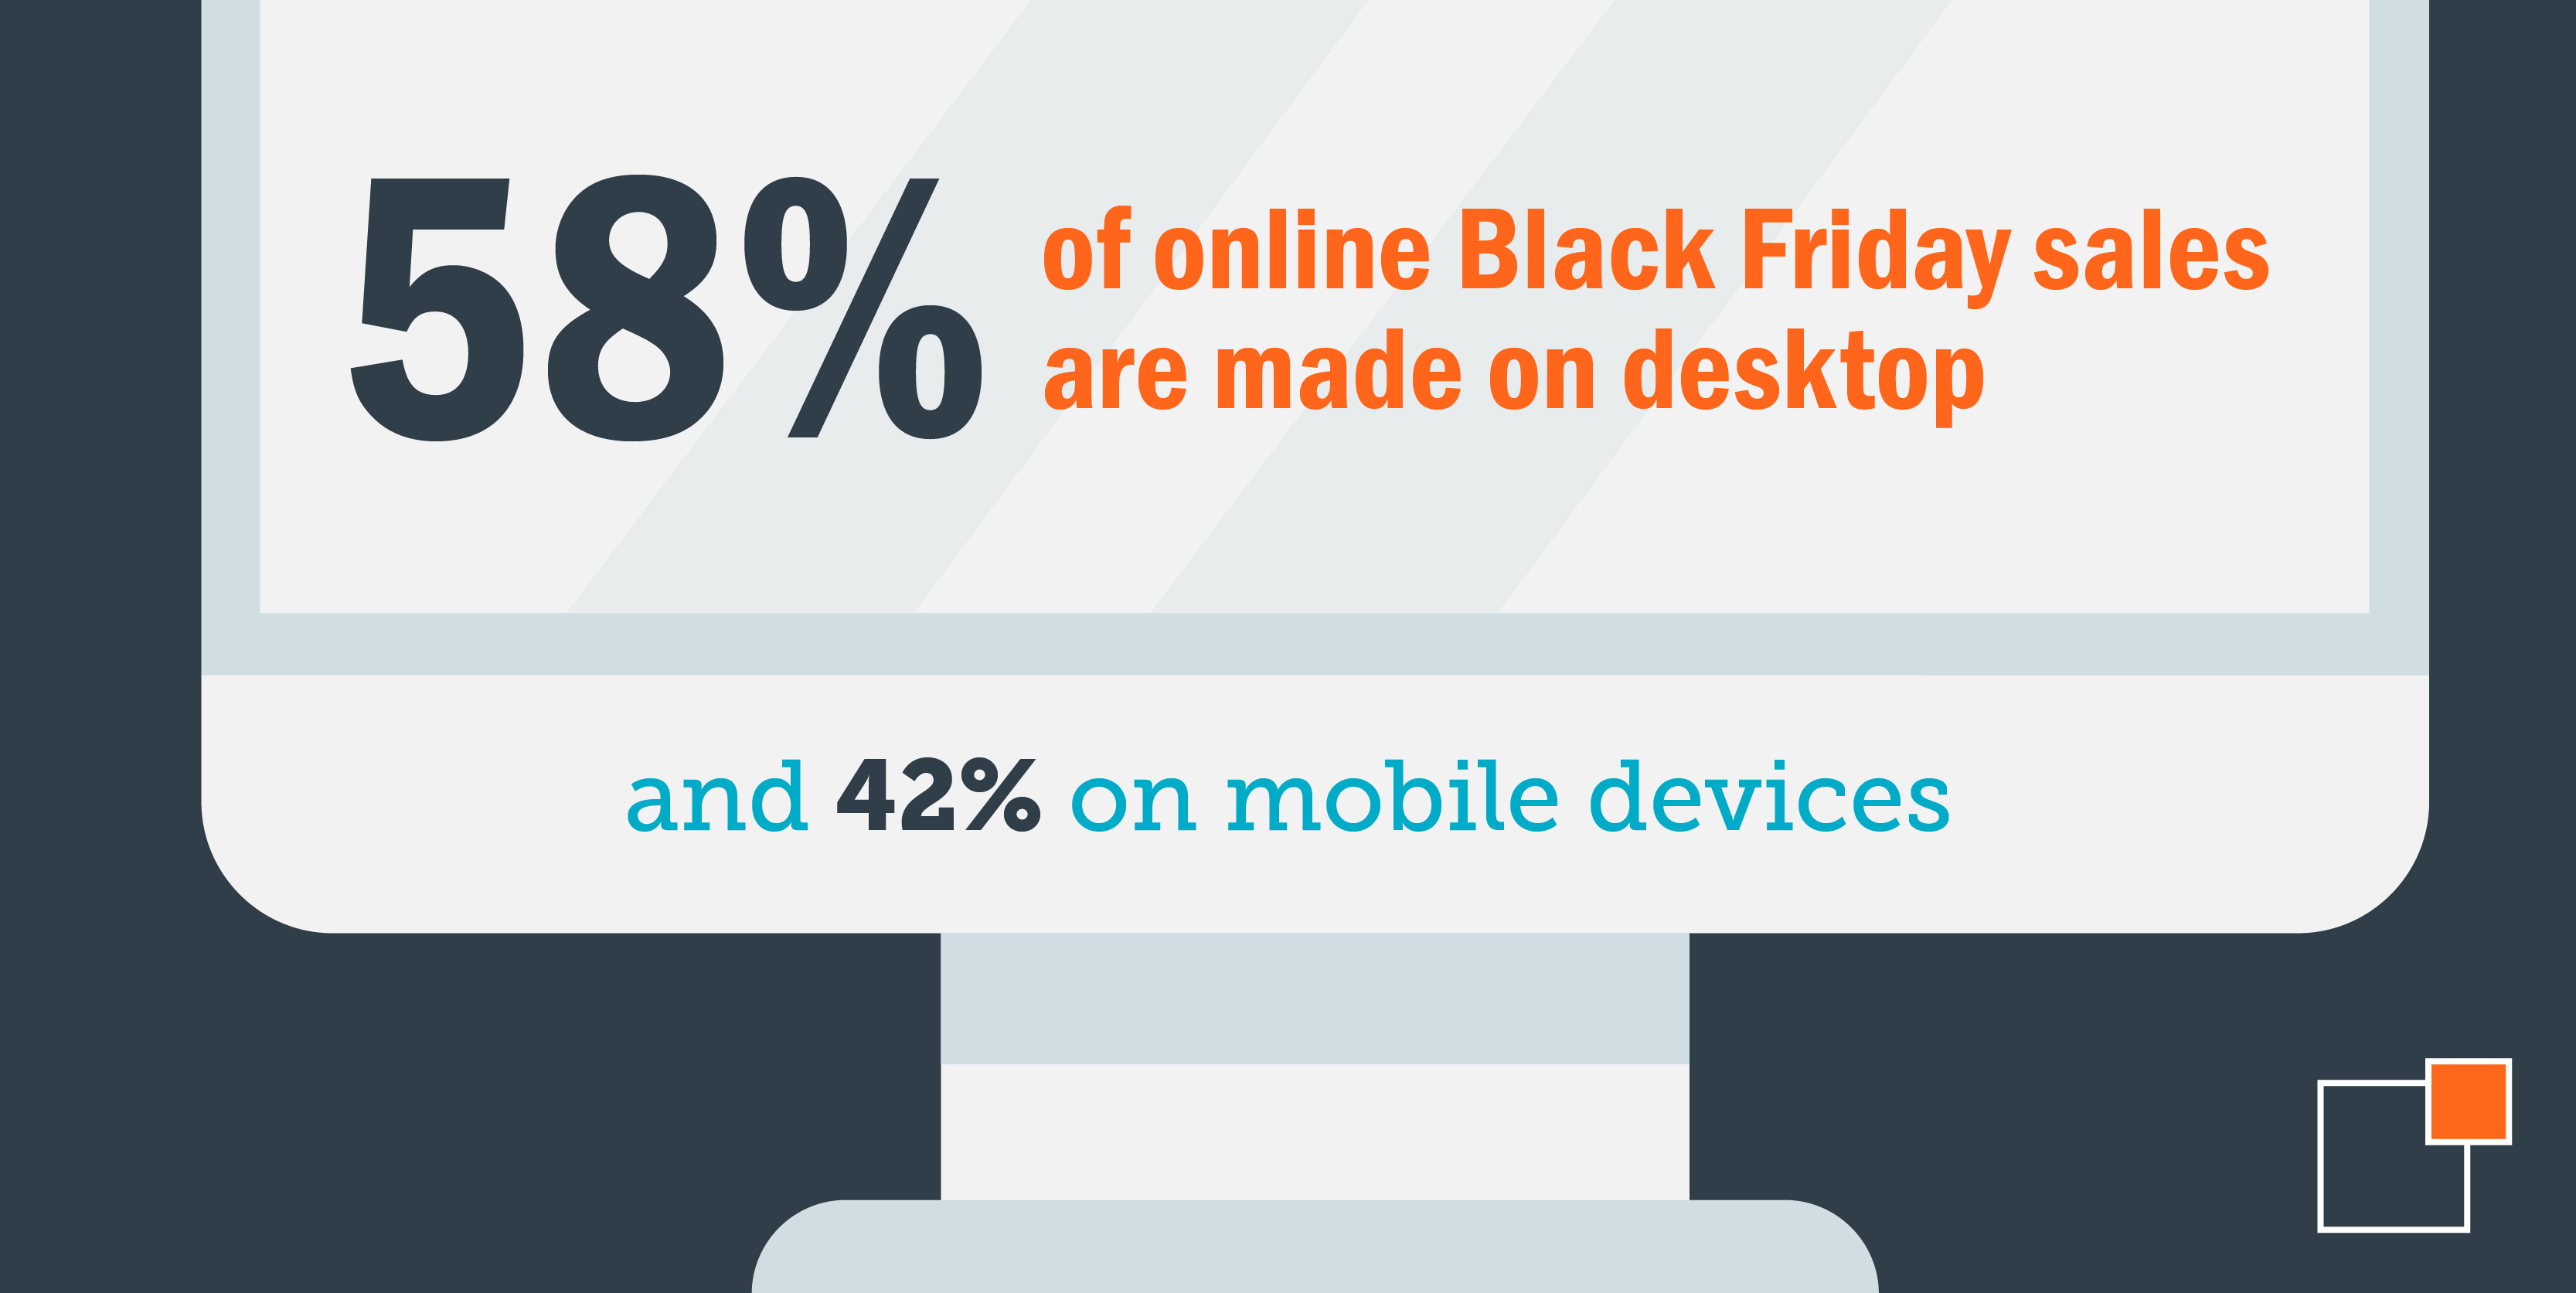 58%25 of online Black Friday sales are made on desktop and 42%25 on mobile devices.